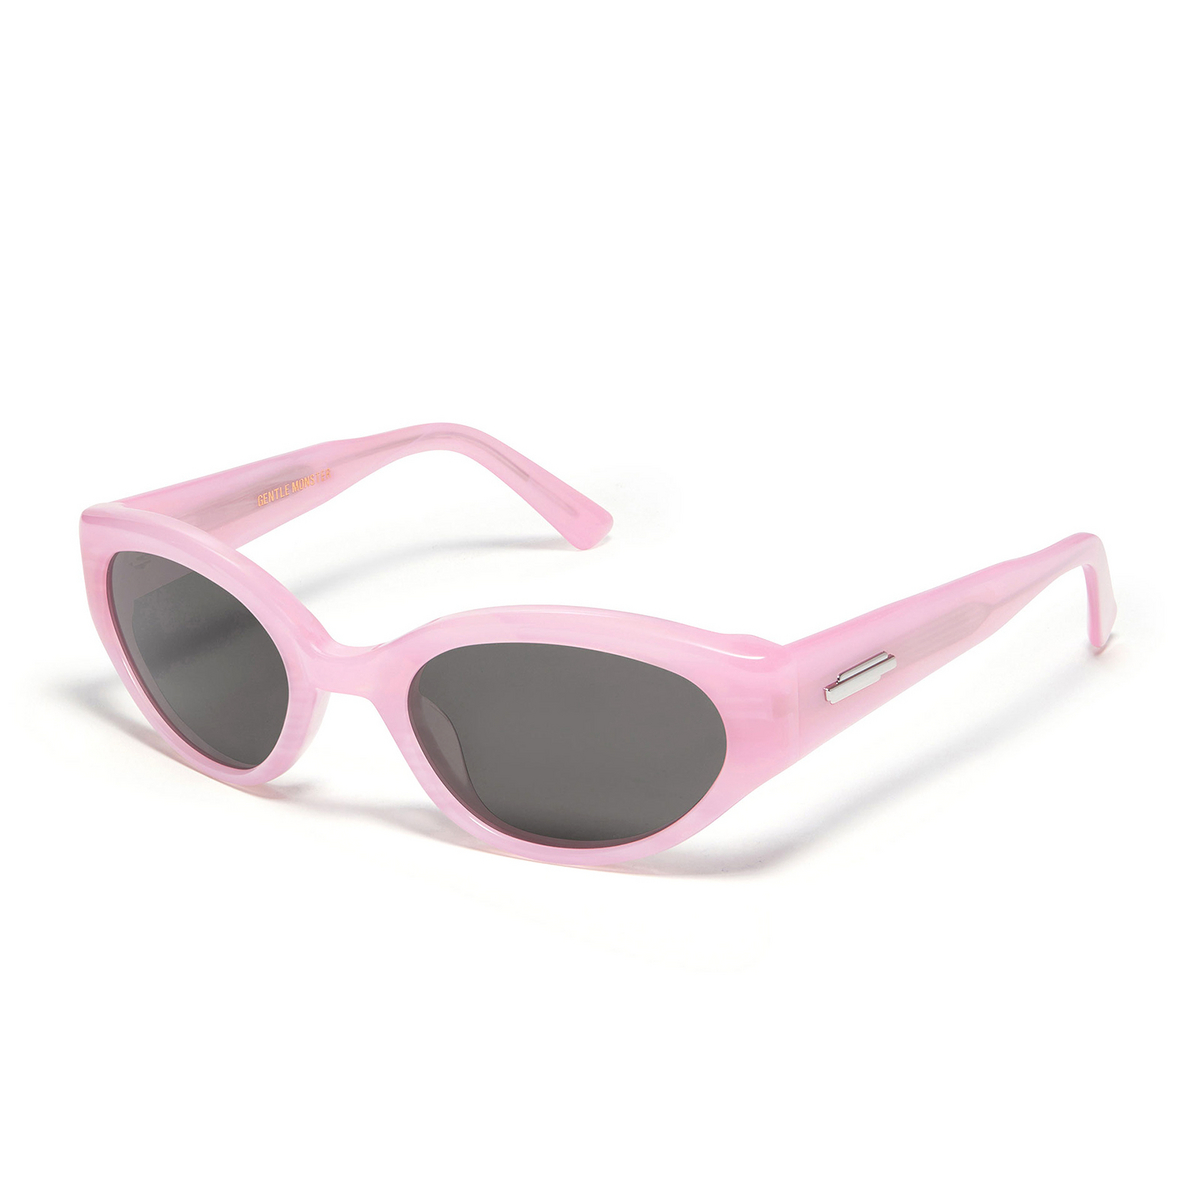 Gentle Monster® Cat-eye Sunglasses: Molto color Pink P1 - three-quarters view.